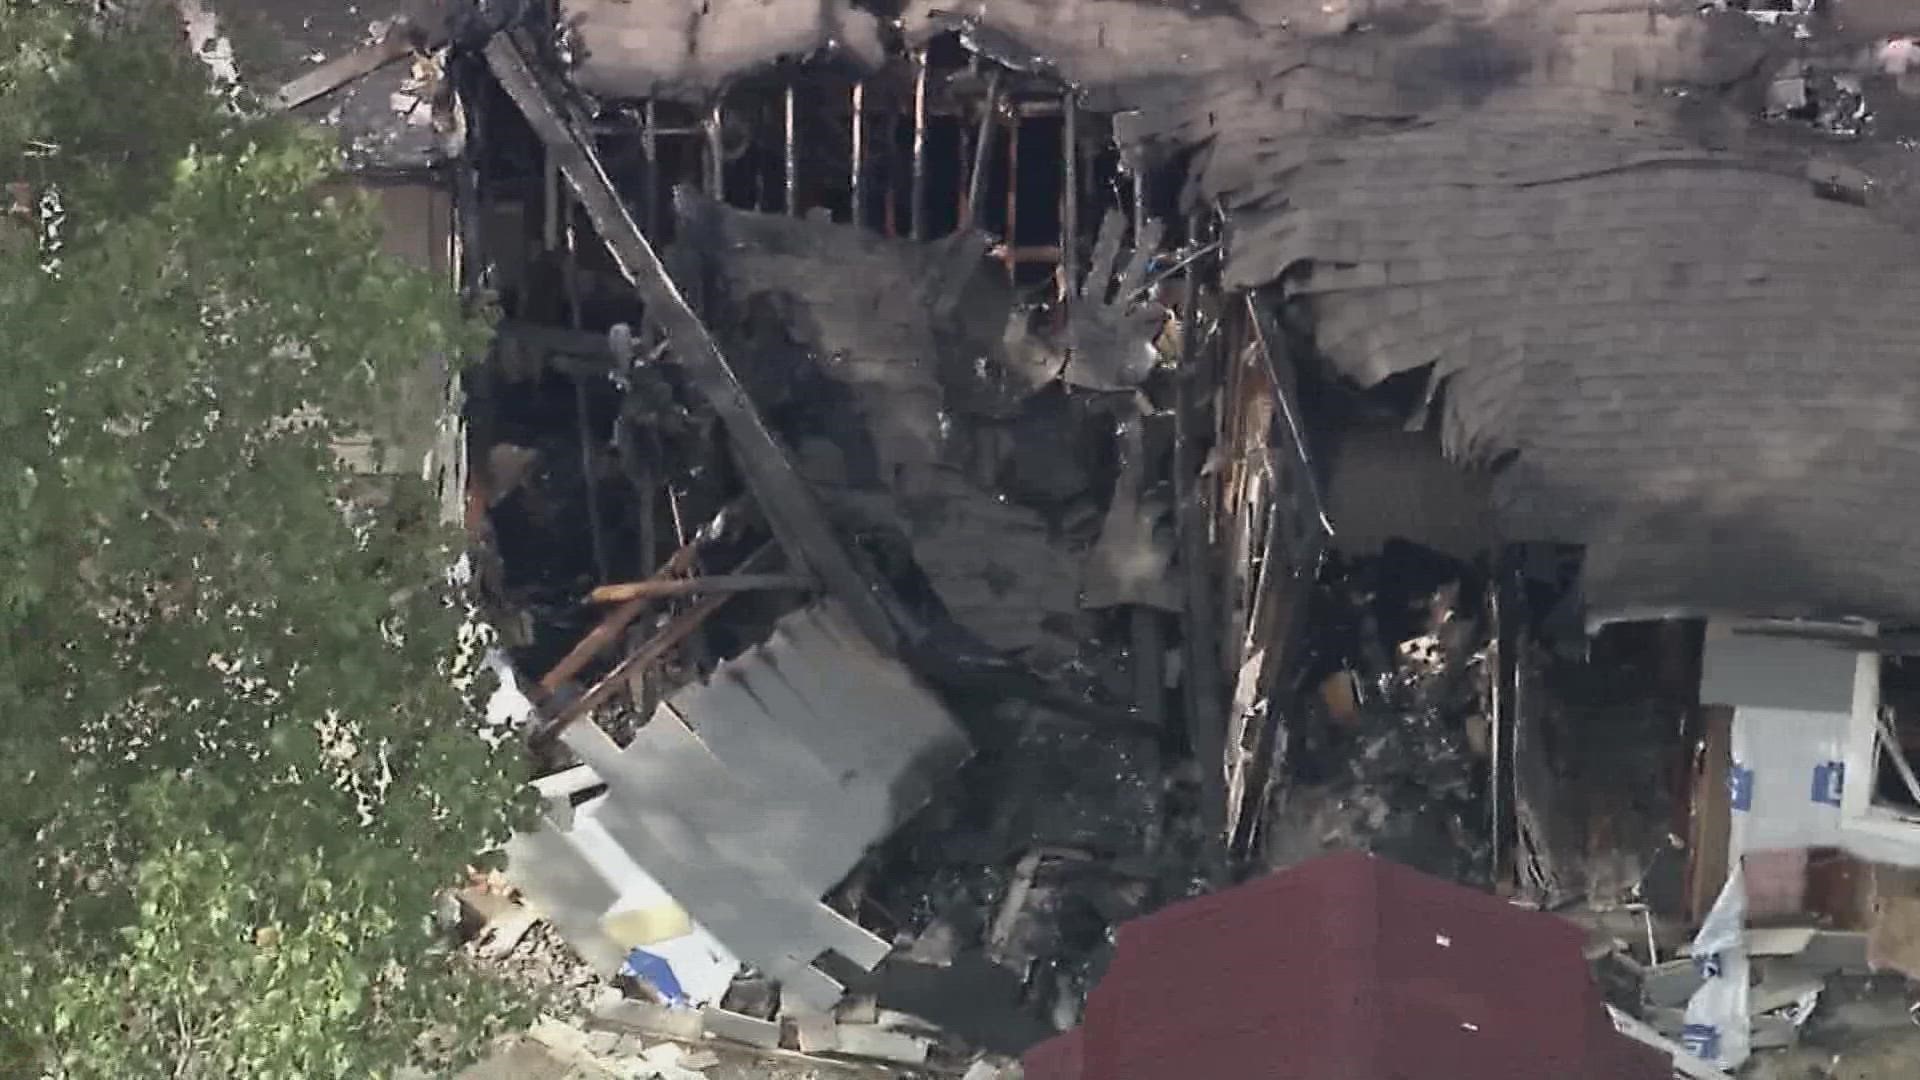 Family and neighbors are trying to understand what happened to cause a house explosion in Garland.